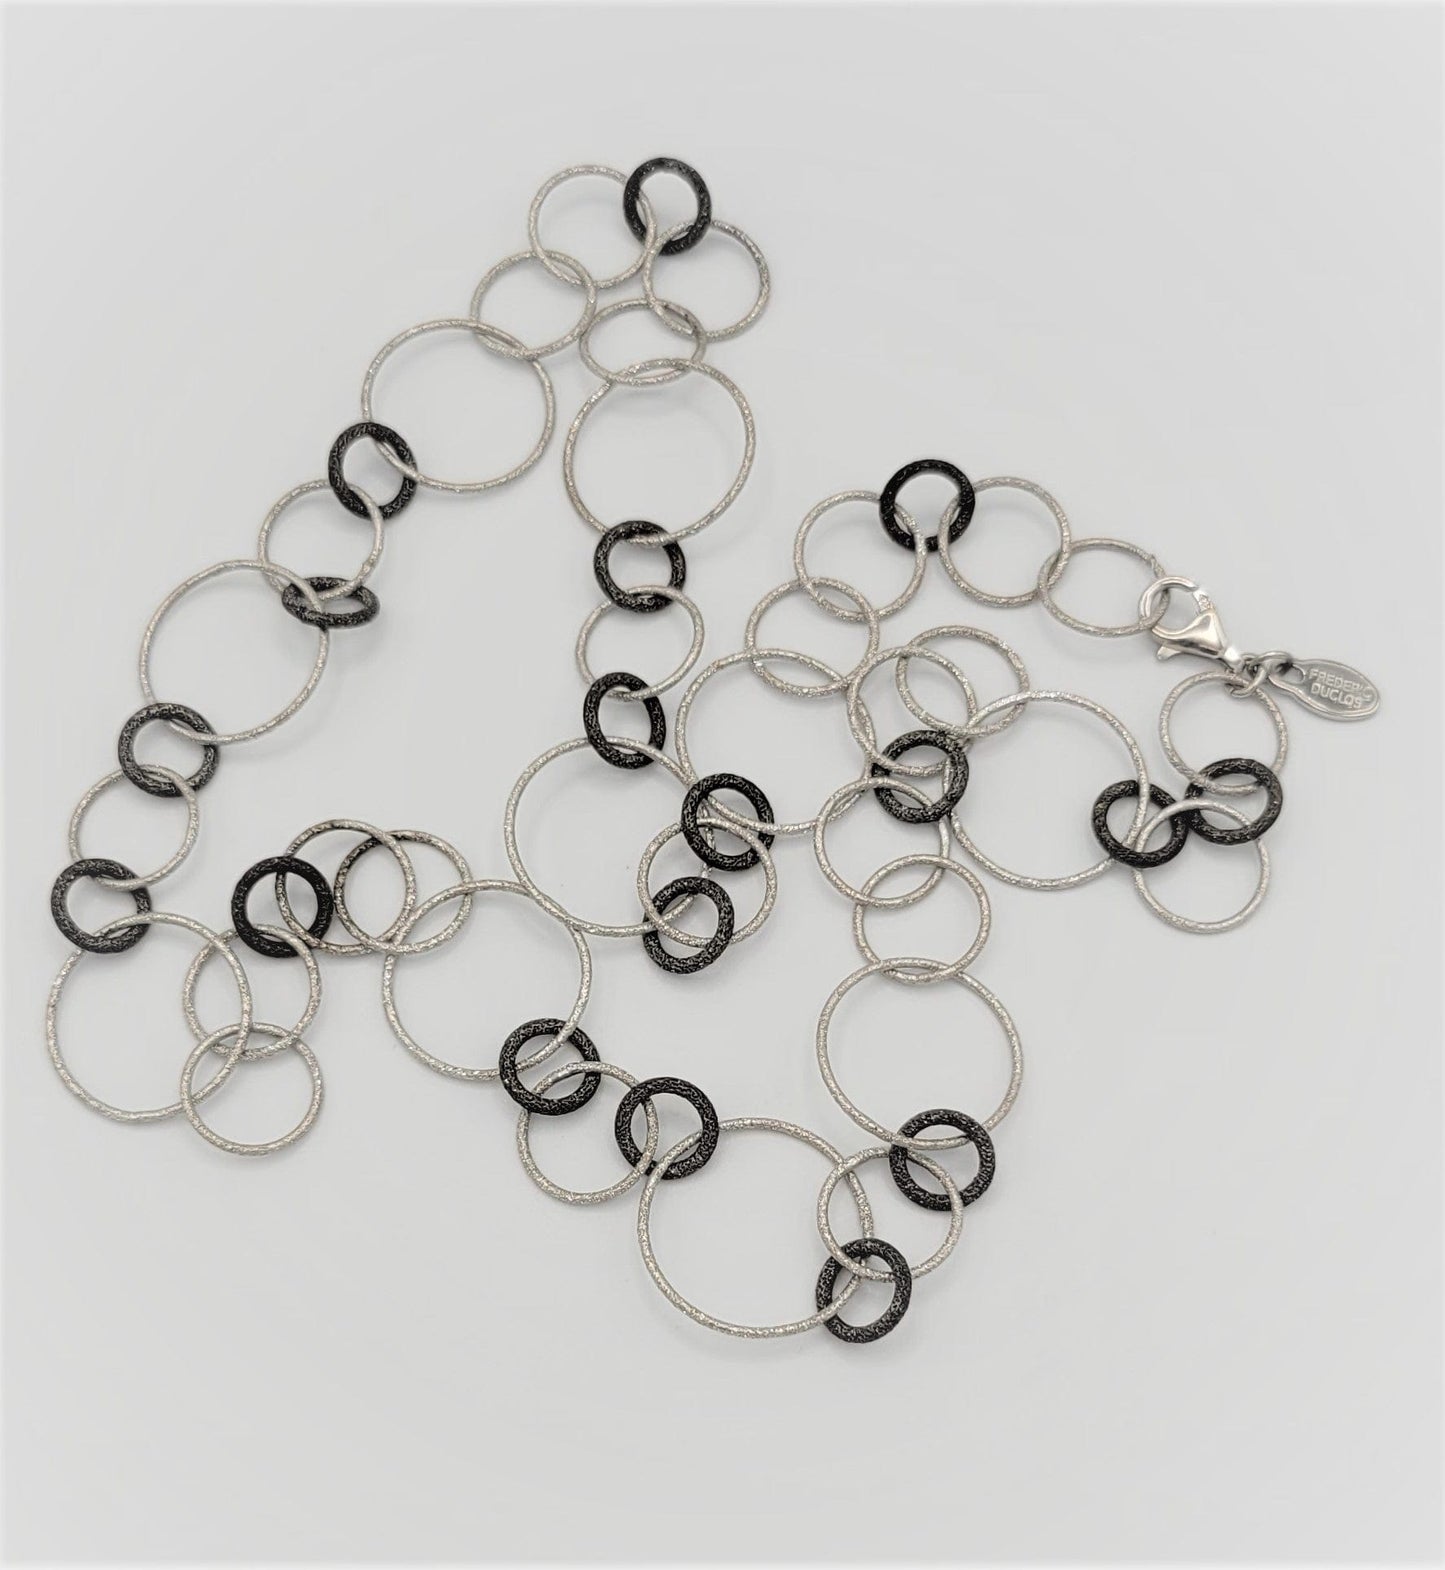 Frederic Duclos Jewelry Retired Sterling Modernist Circles Necklace by French Designer Frederic Duclos